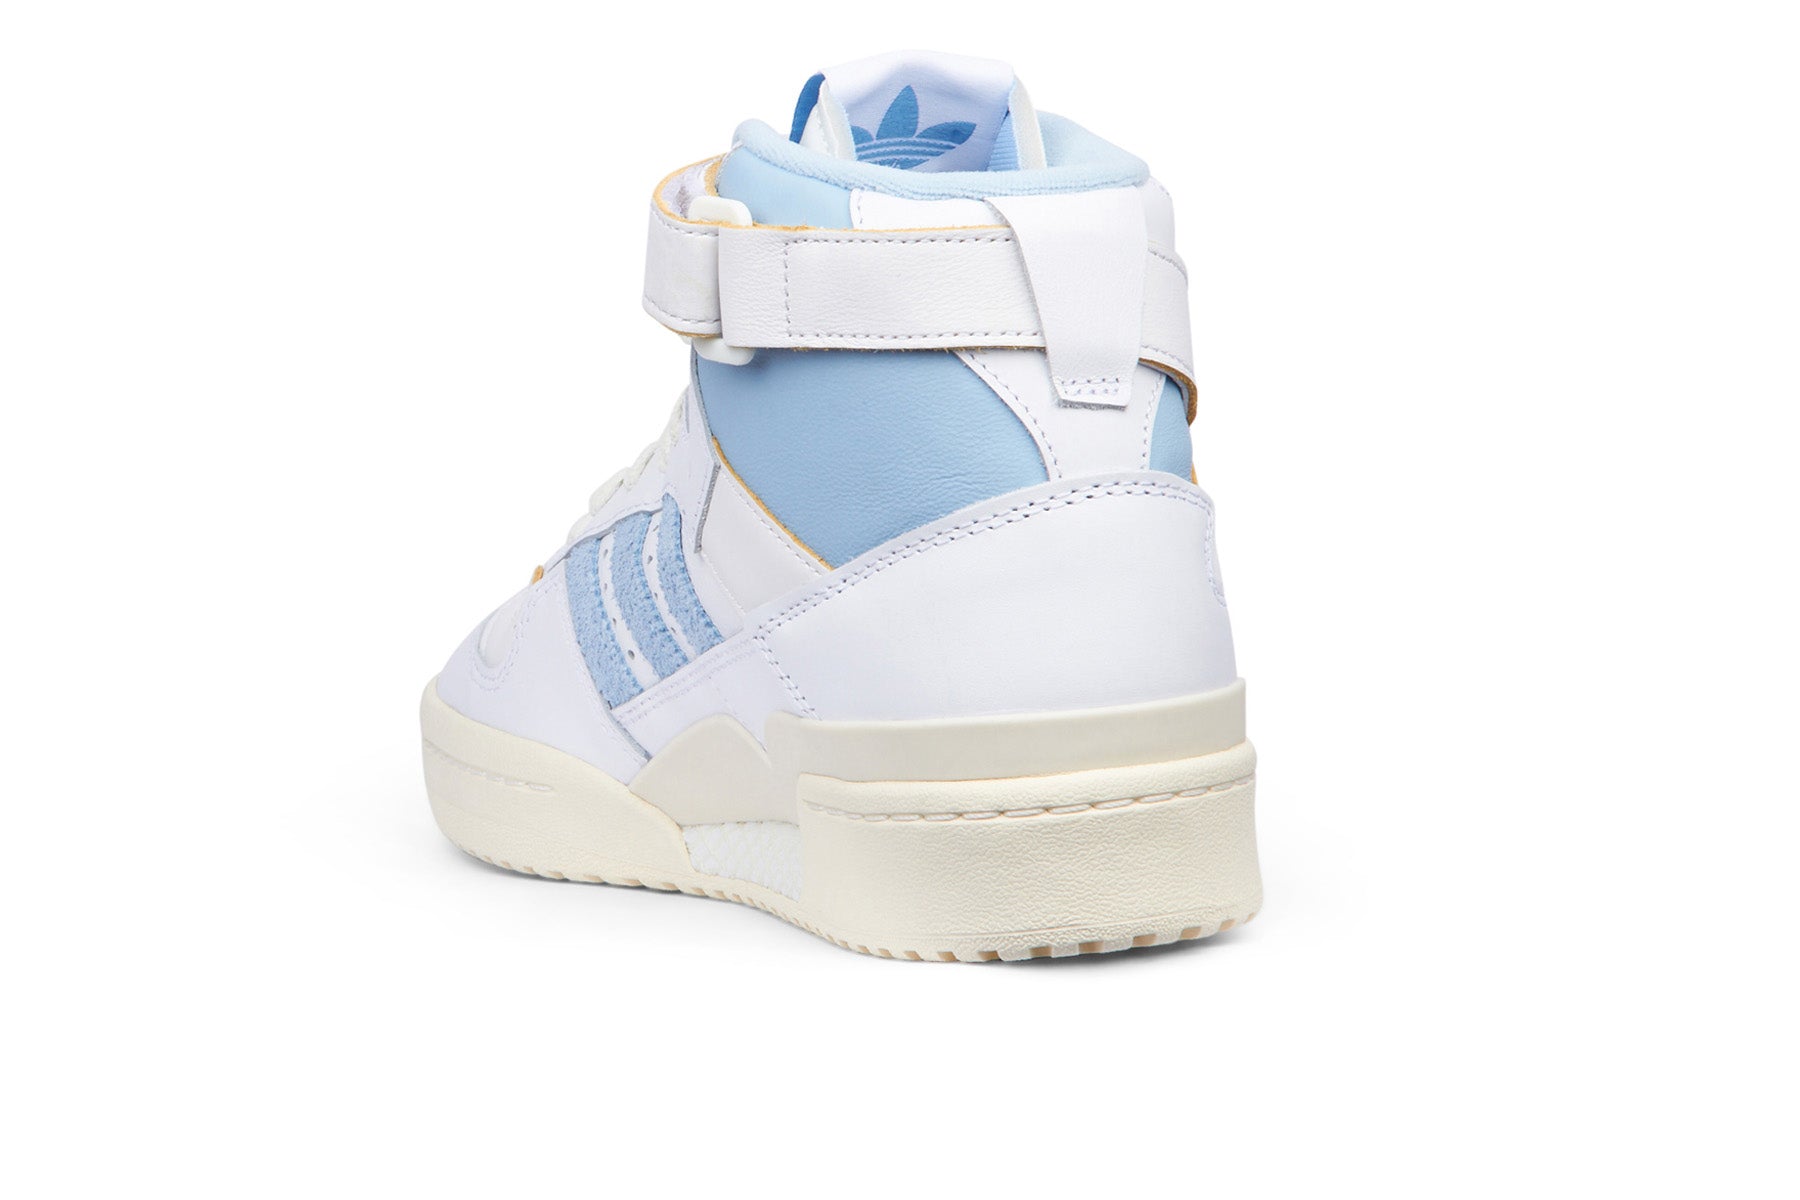 Adidas Forum 84 Hi - FTWR White/Off White/Clearsky